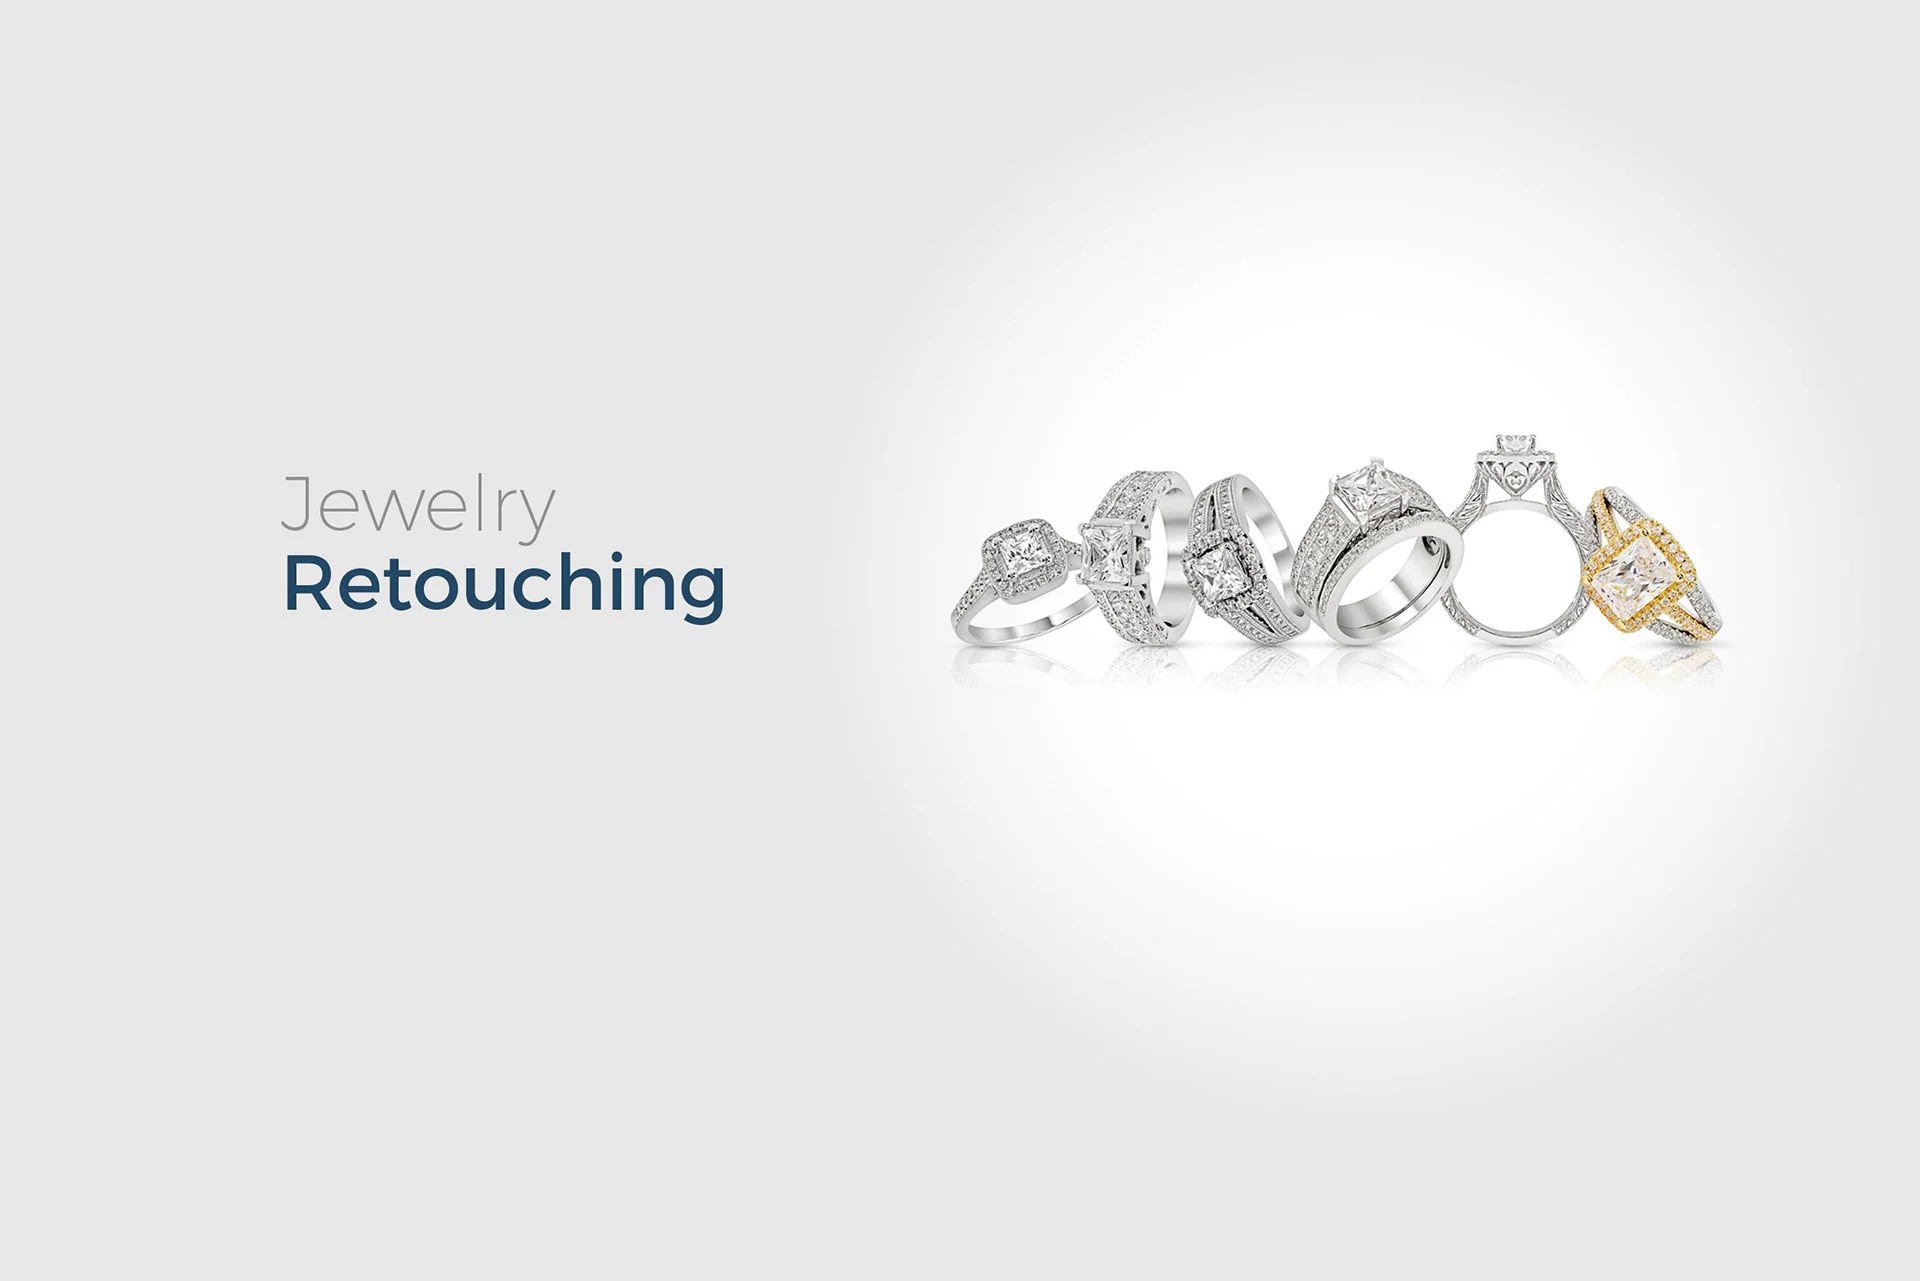 Jewelry Image Retouchig Services